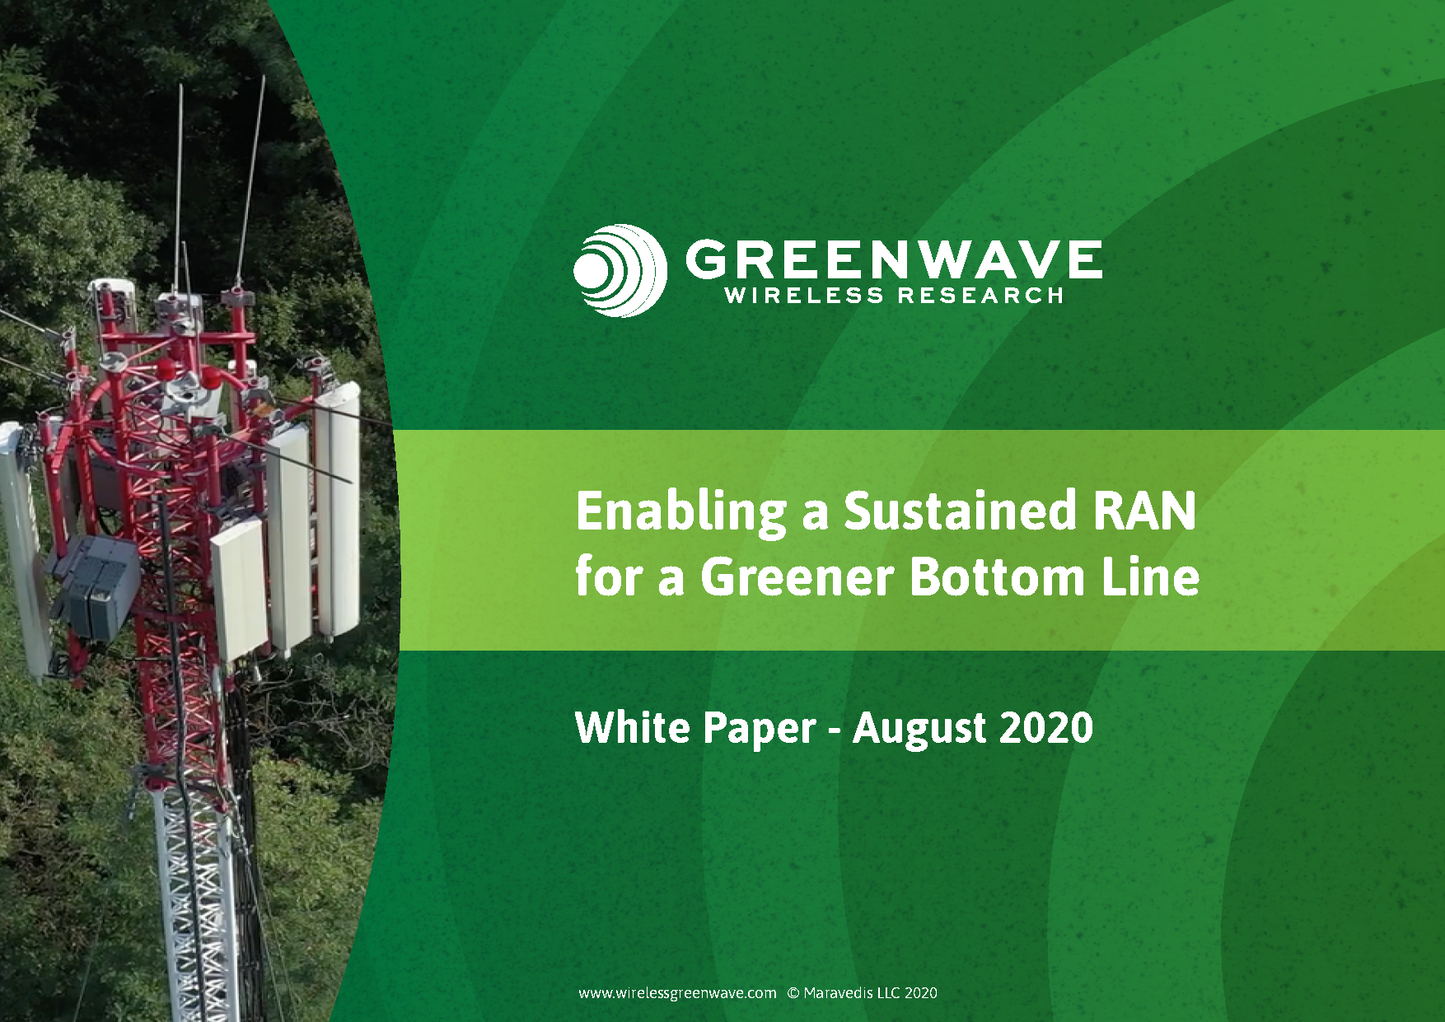 Whitepaper: Enabling a Sustained RAN for a Greener Bottom Line